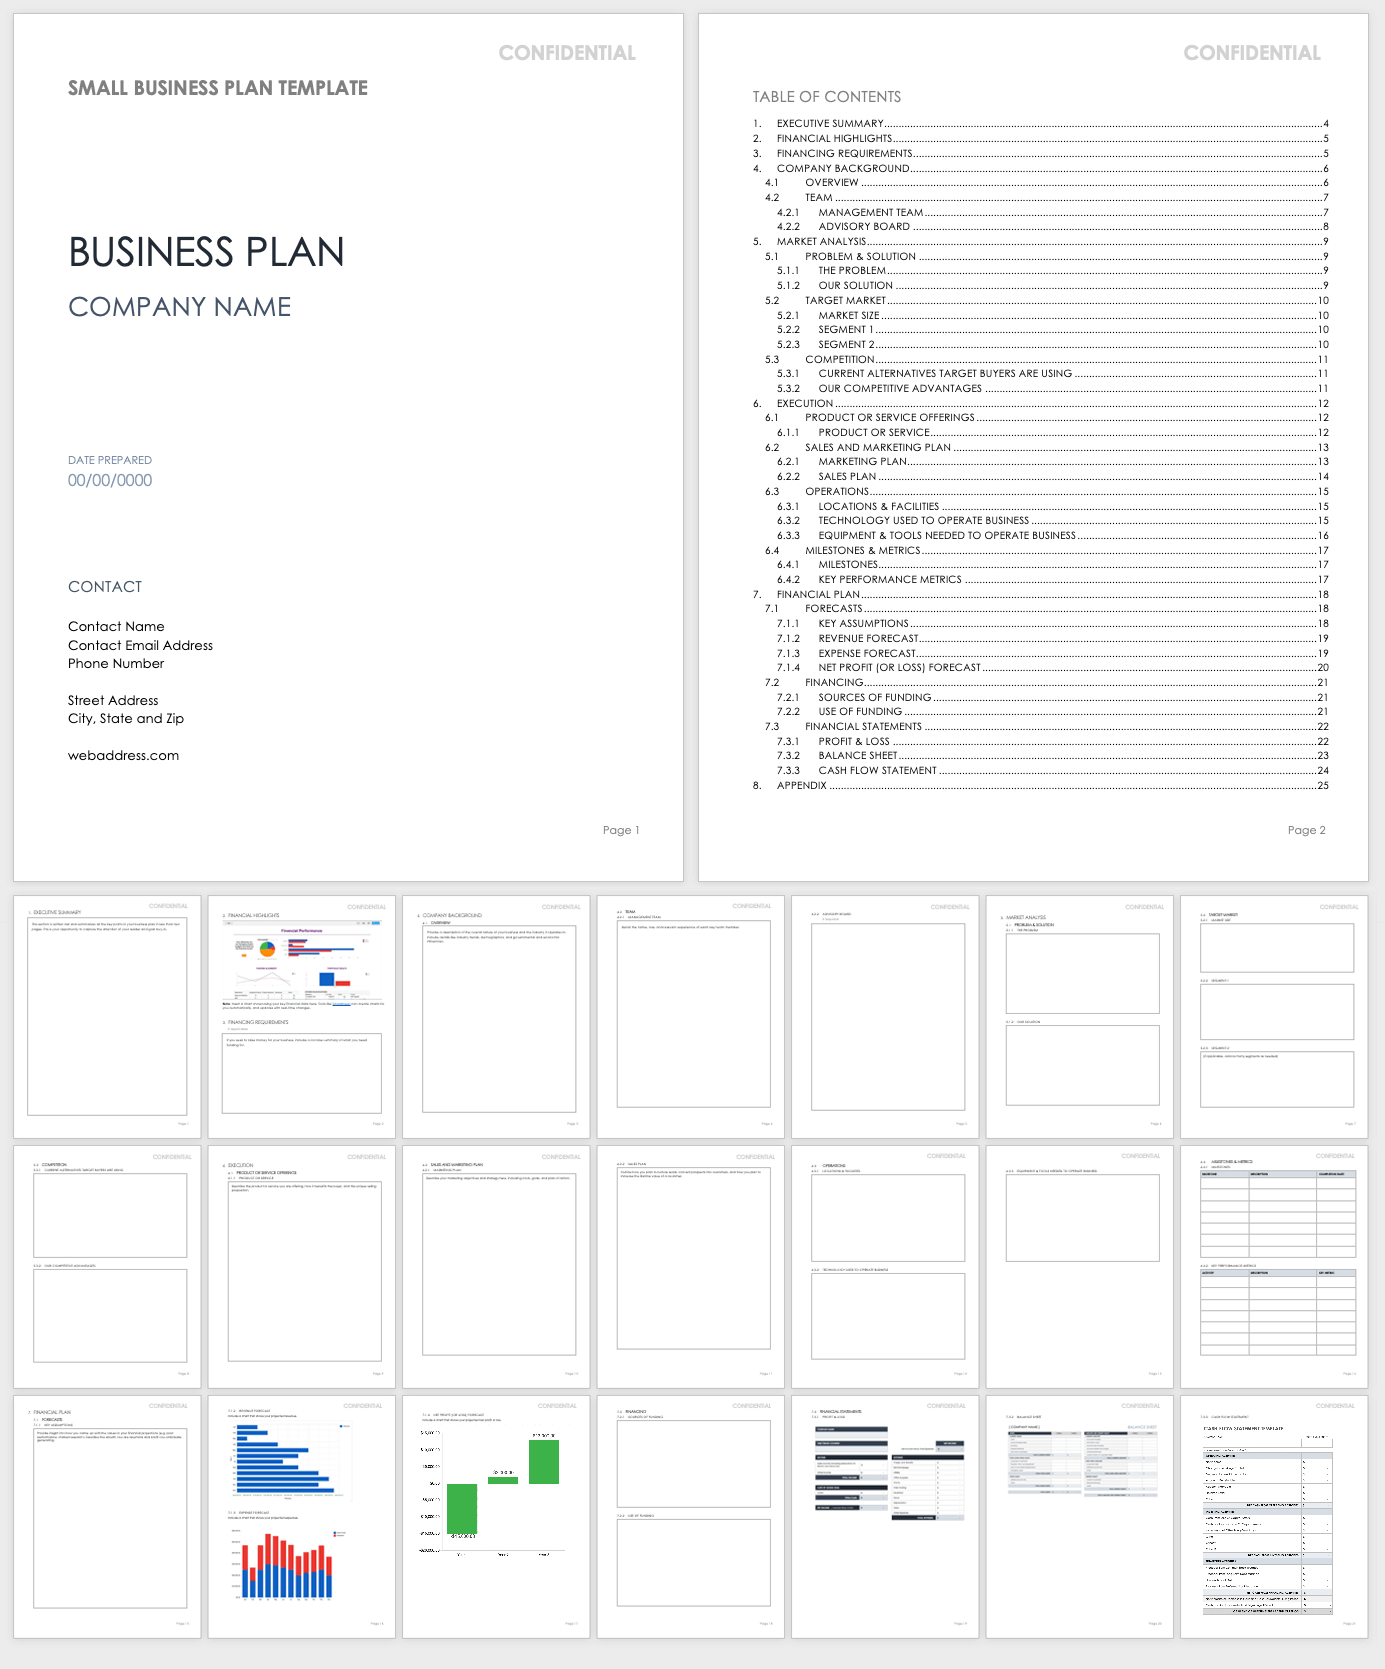 IC Small Business Plan Template WORD 